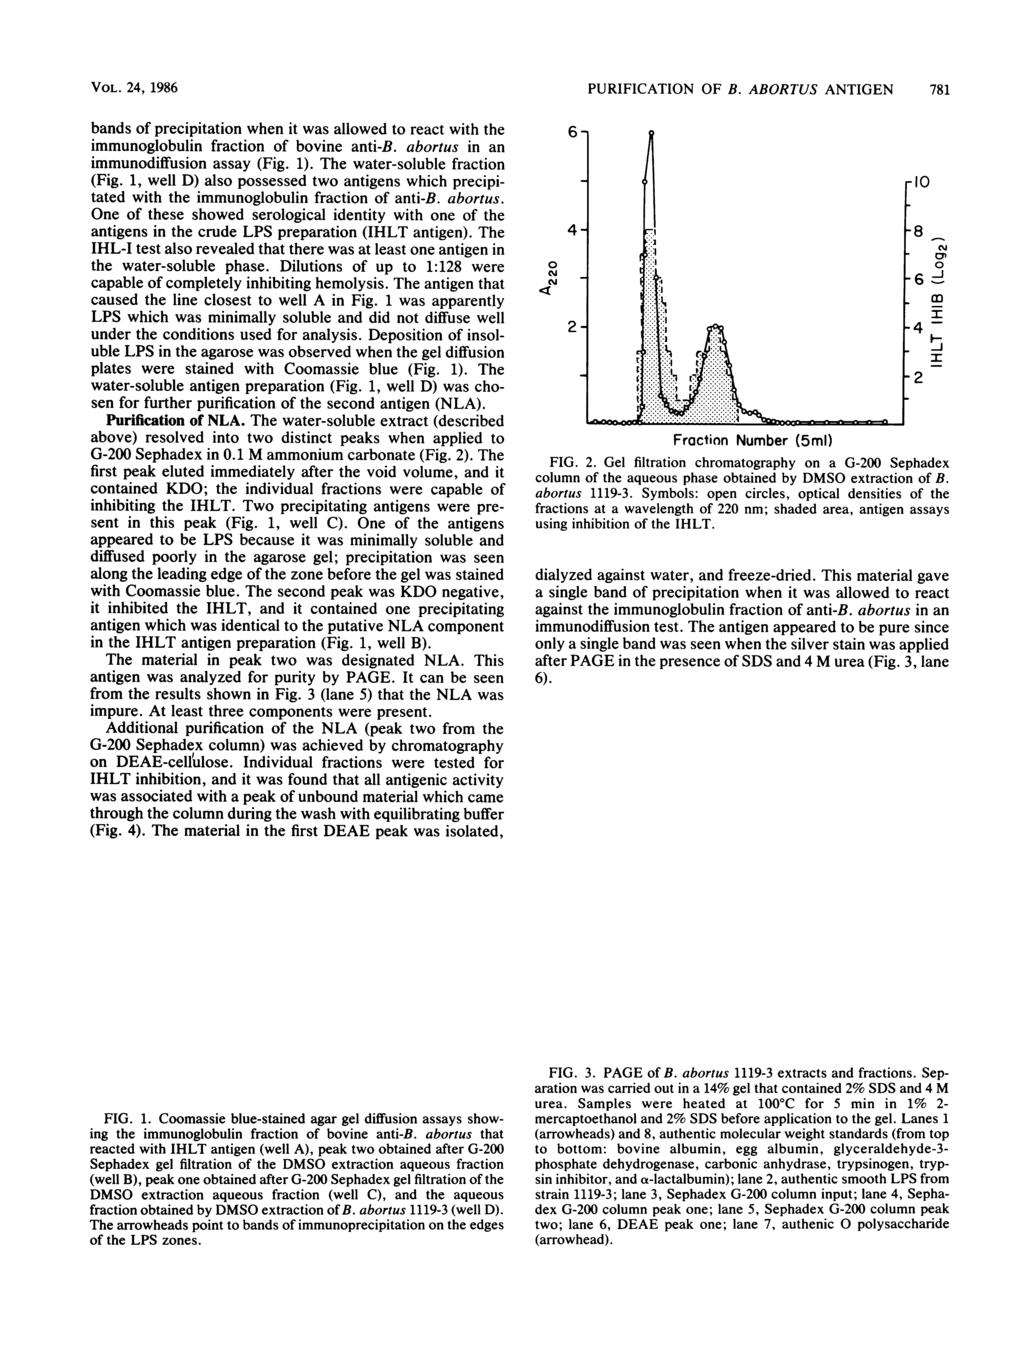 VOL. 24, 1986 bands of precipitation when it was allowed to react with the immunoglobulin fraction of bovine anti-b. abortus in an immunodiffusion assay (Fig. 1). The water-soluble fraction (Fig.